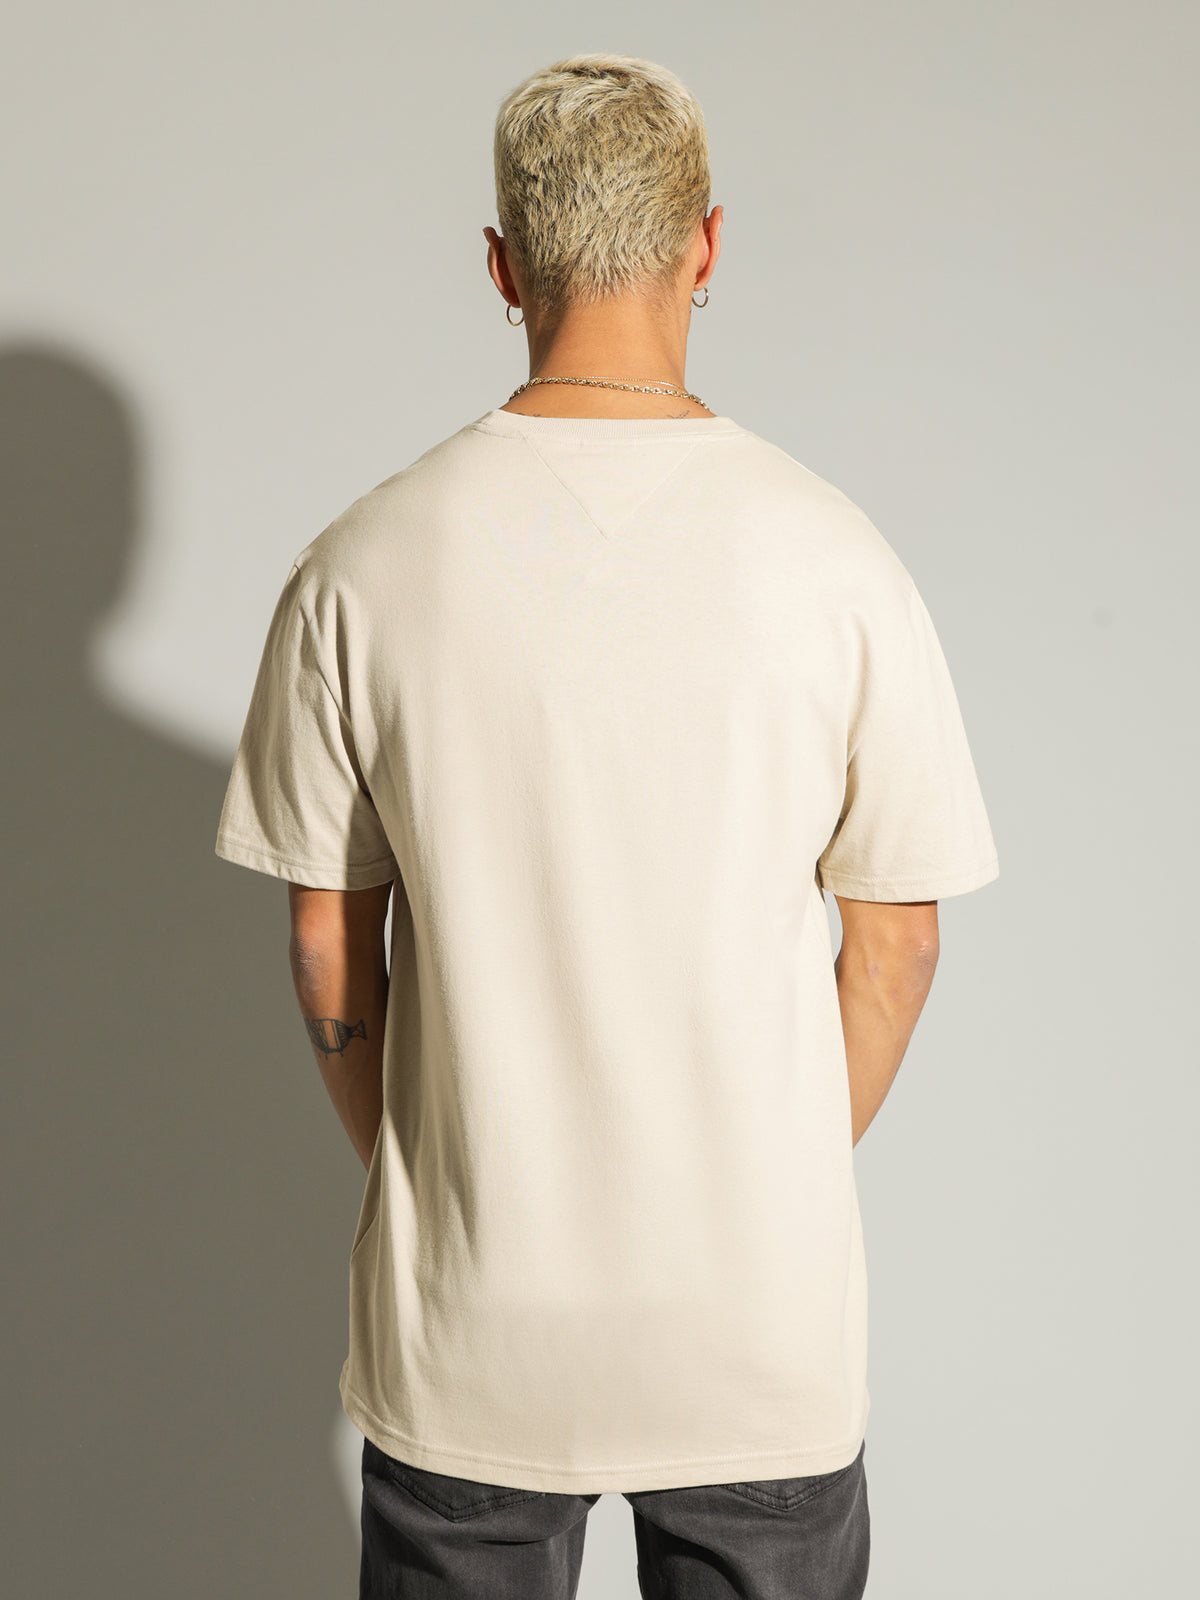 SIGNATURE Logo Recycled Cotton T-Shirt in Savannah Sand